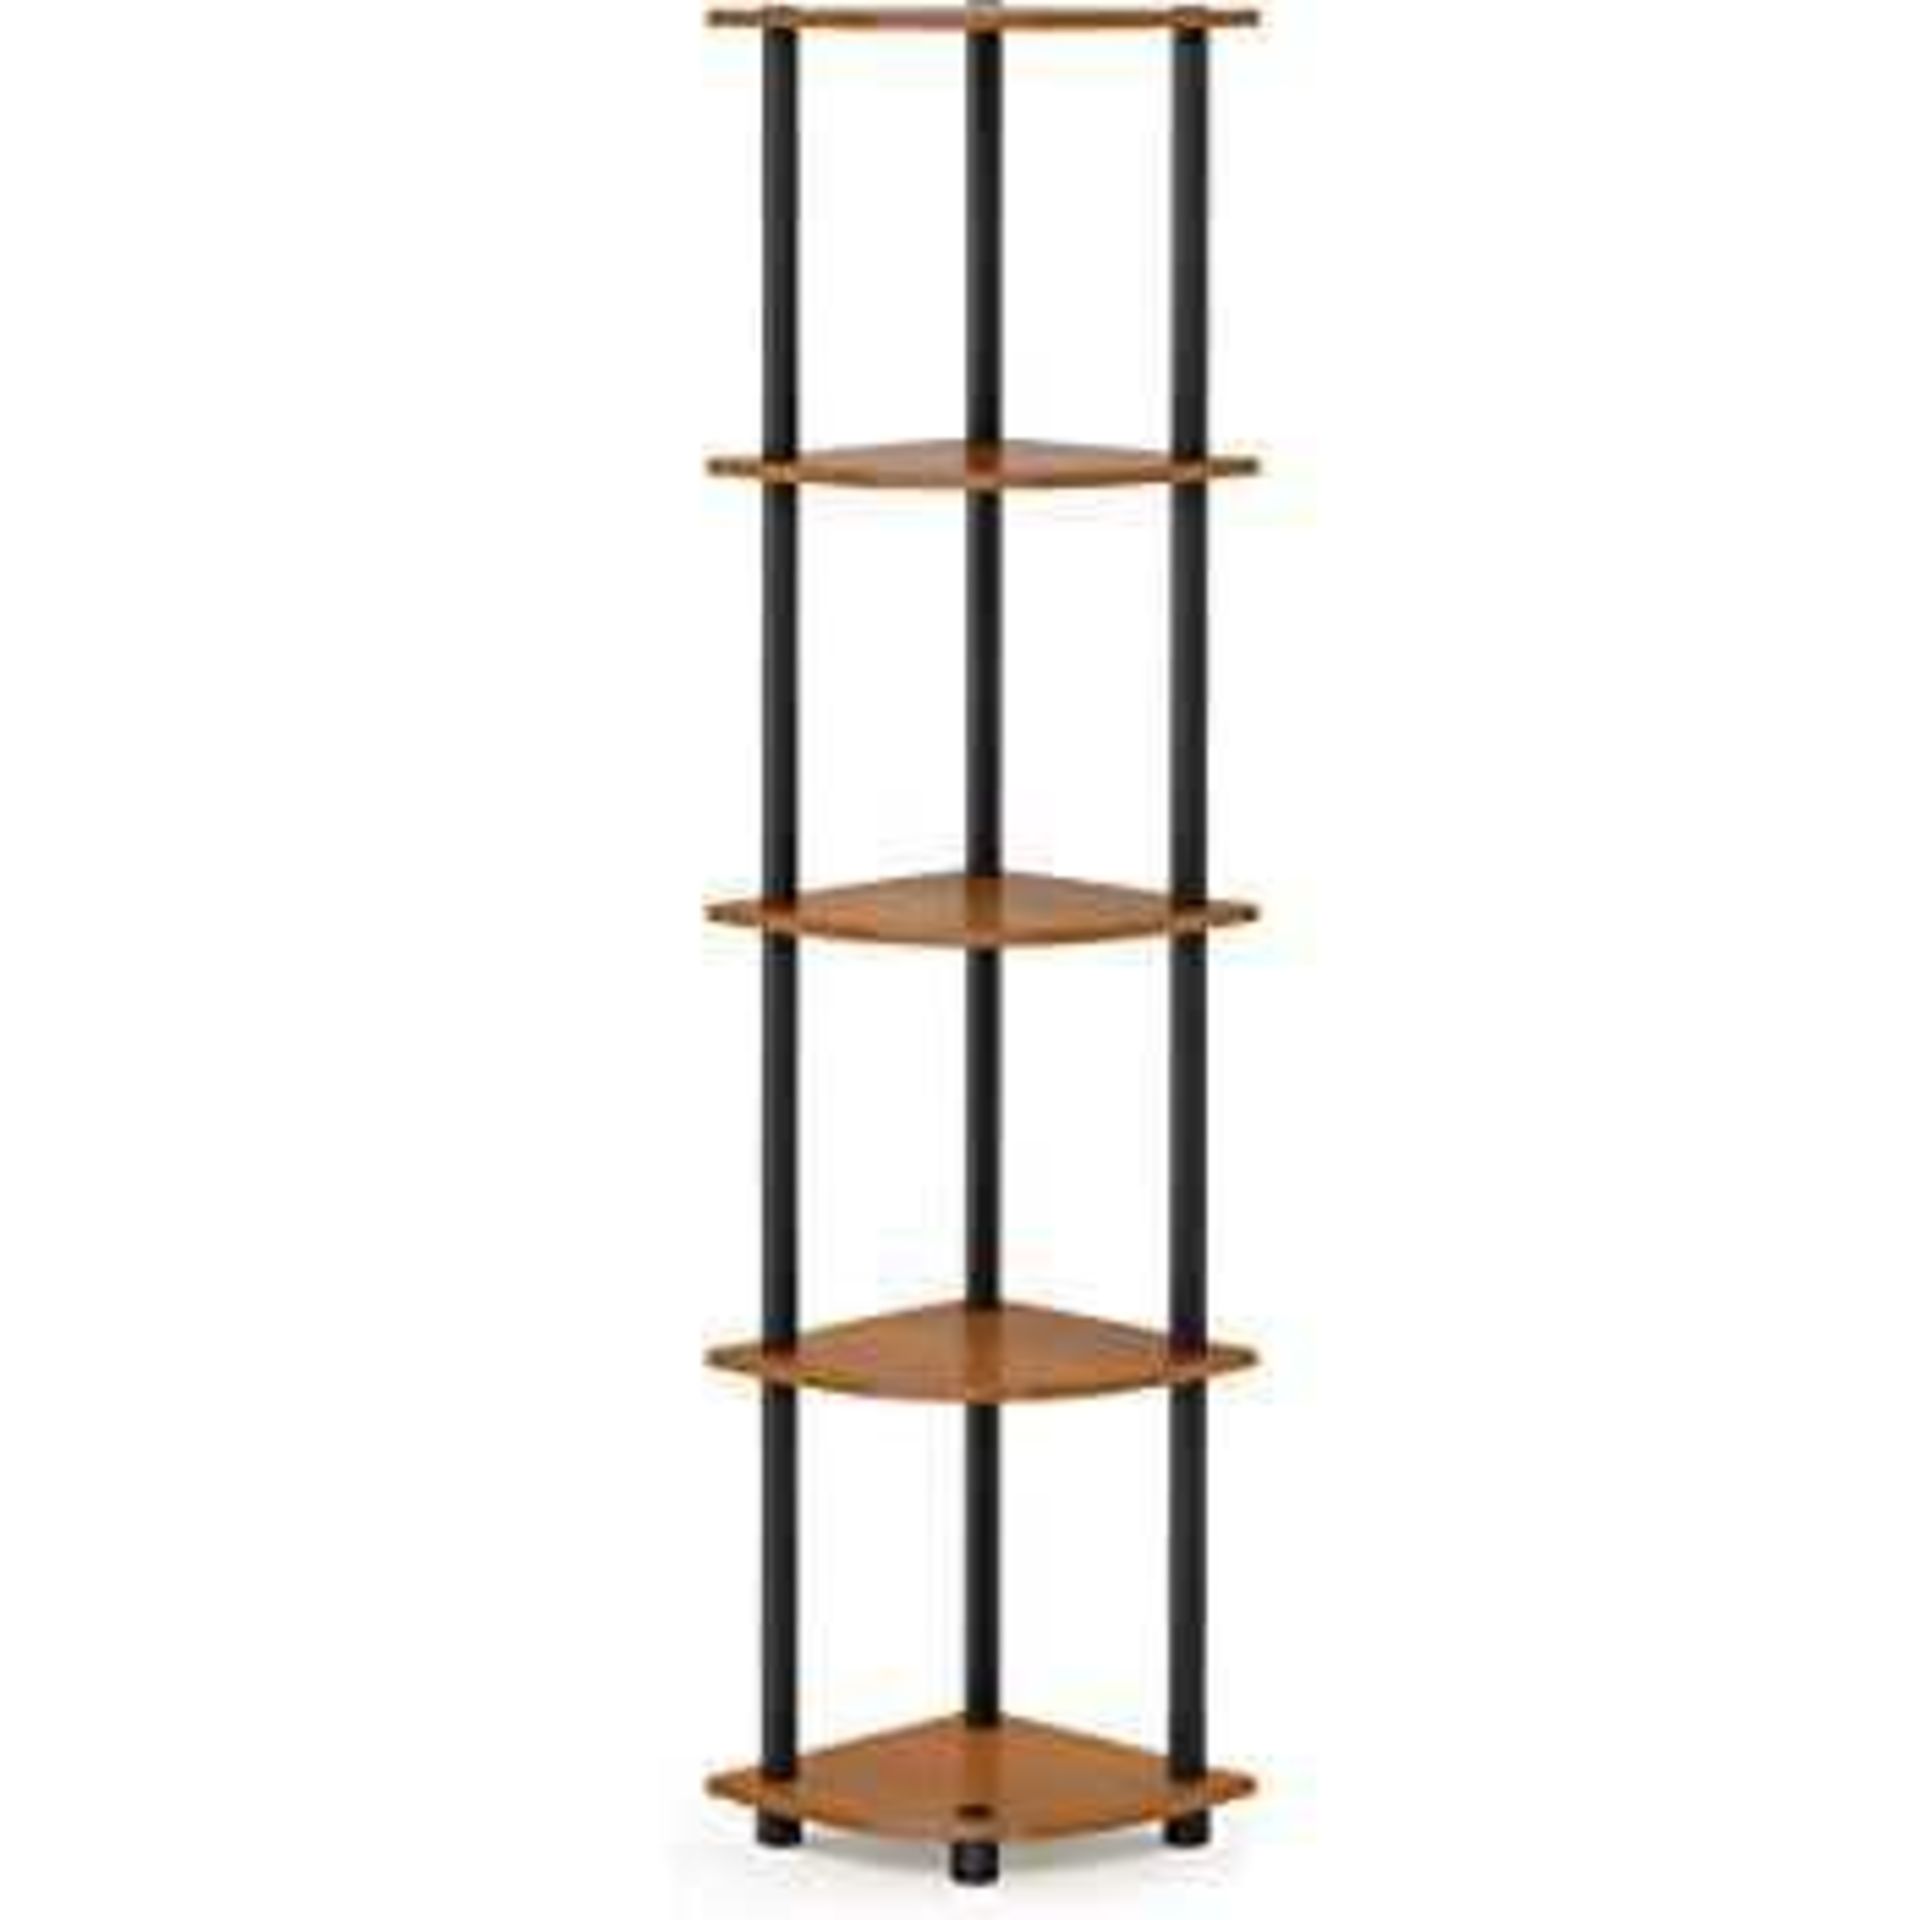 RRP £50 Boxed Furrino 5 Tier Corner Shelf (17814) (Appraisals Available On Request) (Pictures Are